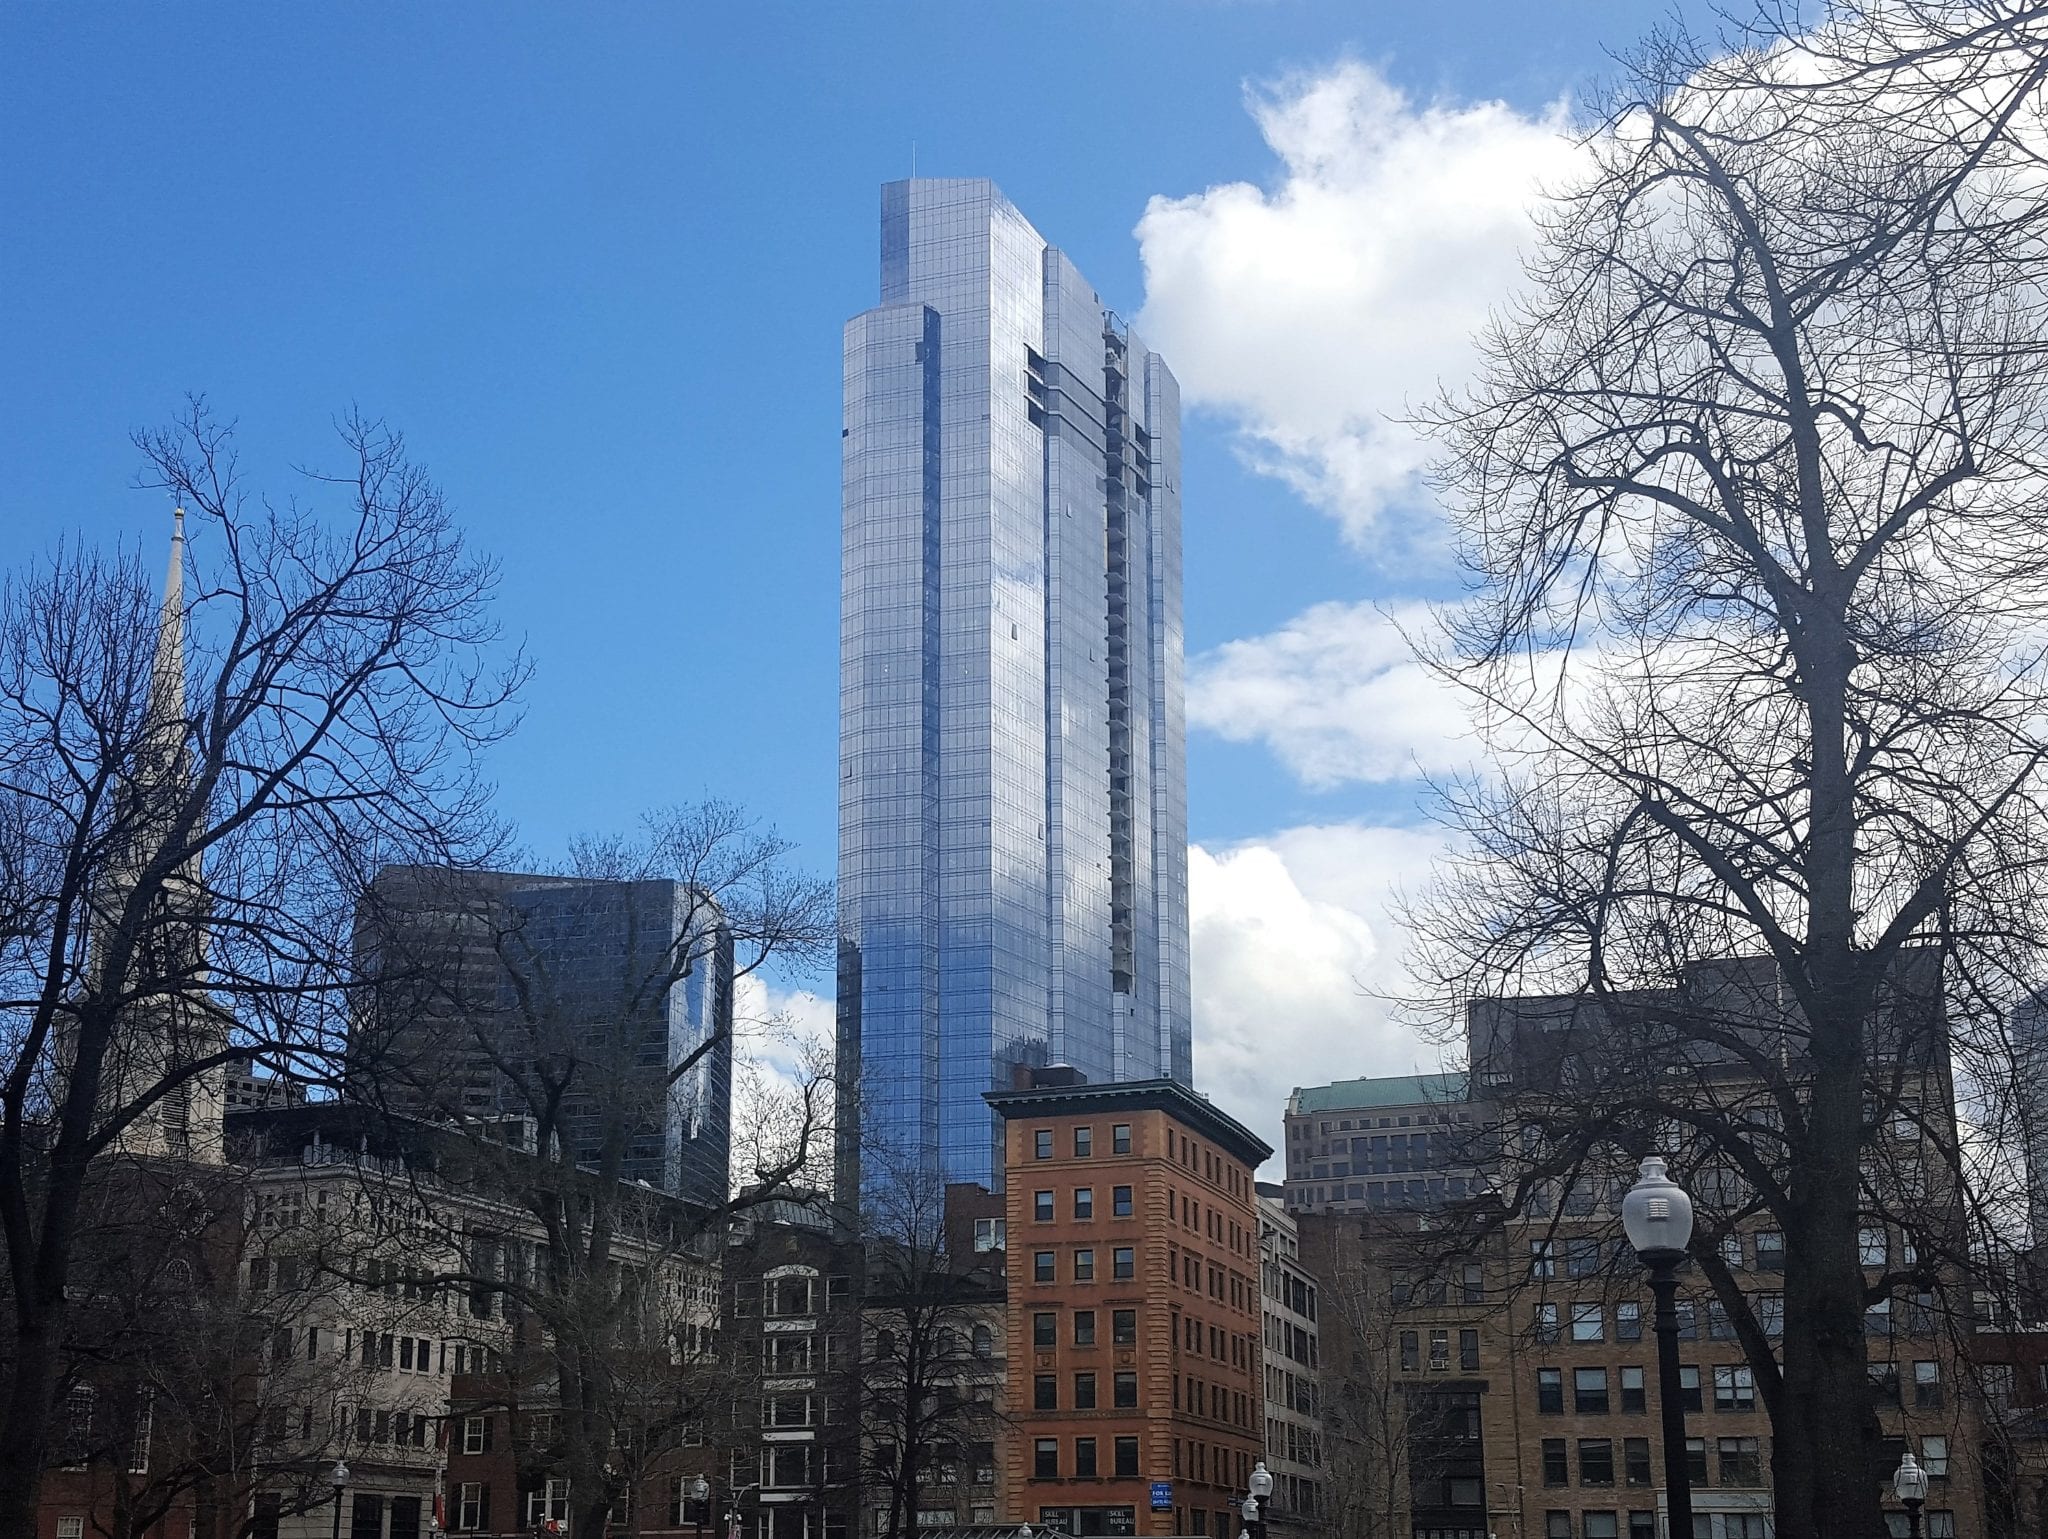 Think tank sees peril in Boston luxury towers